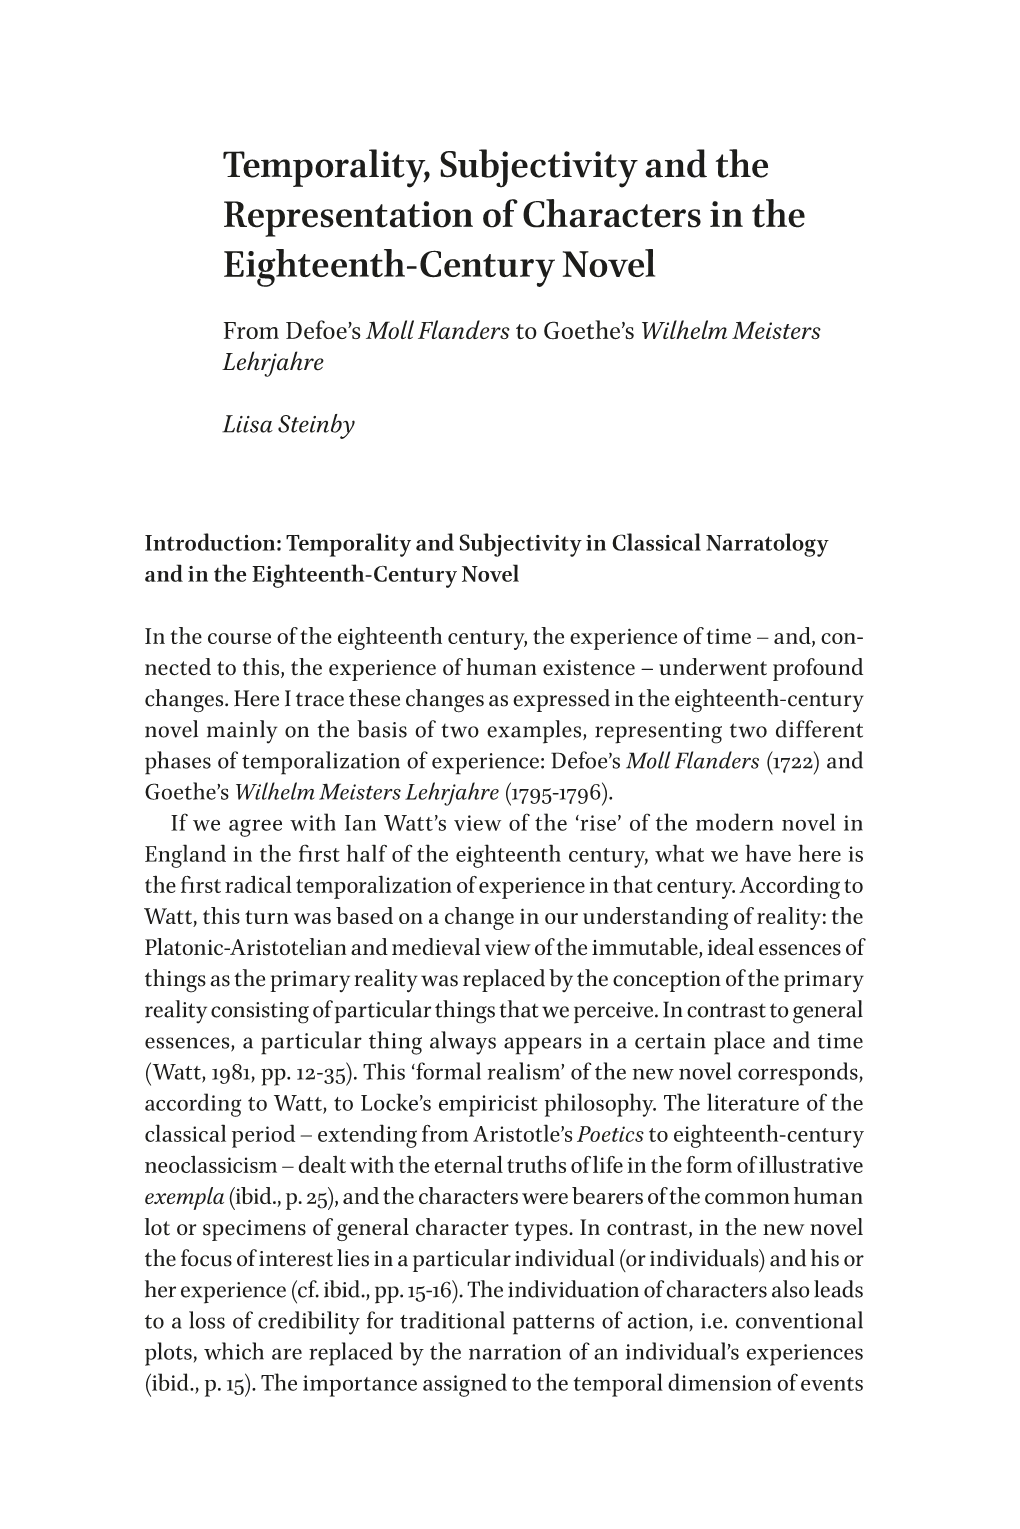 Temporality, Subjectivity and the Representation of Characters in the Eighteenth-Century Novel